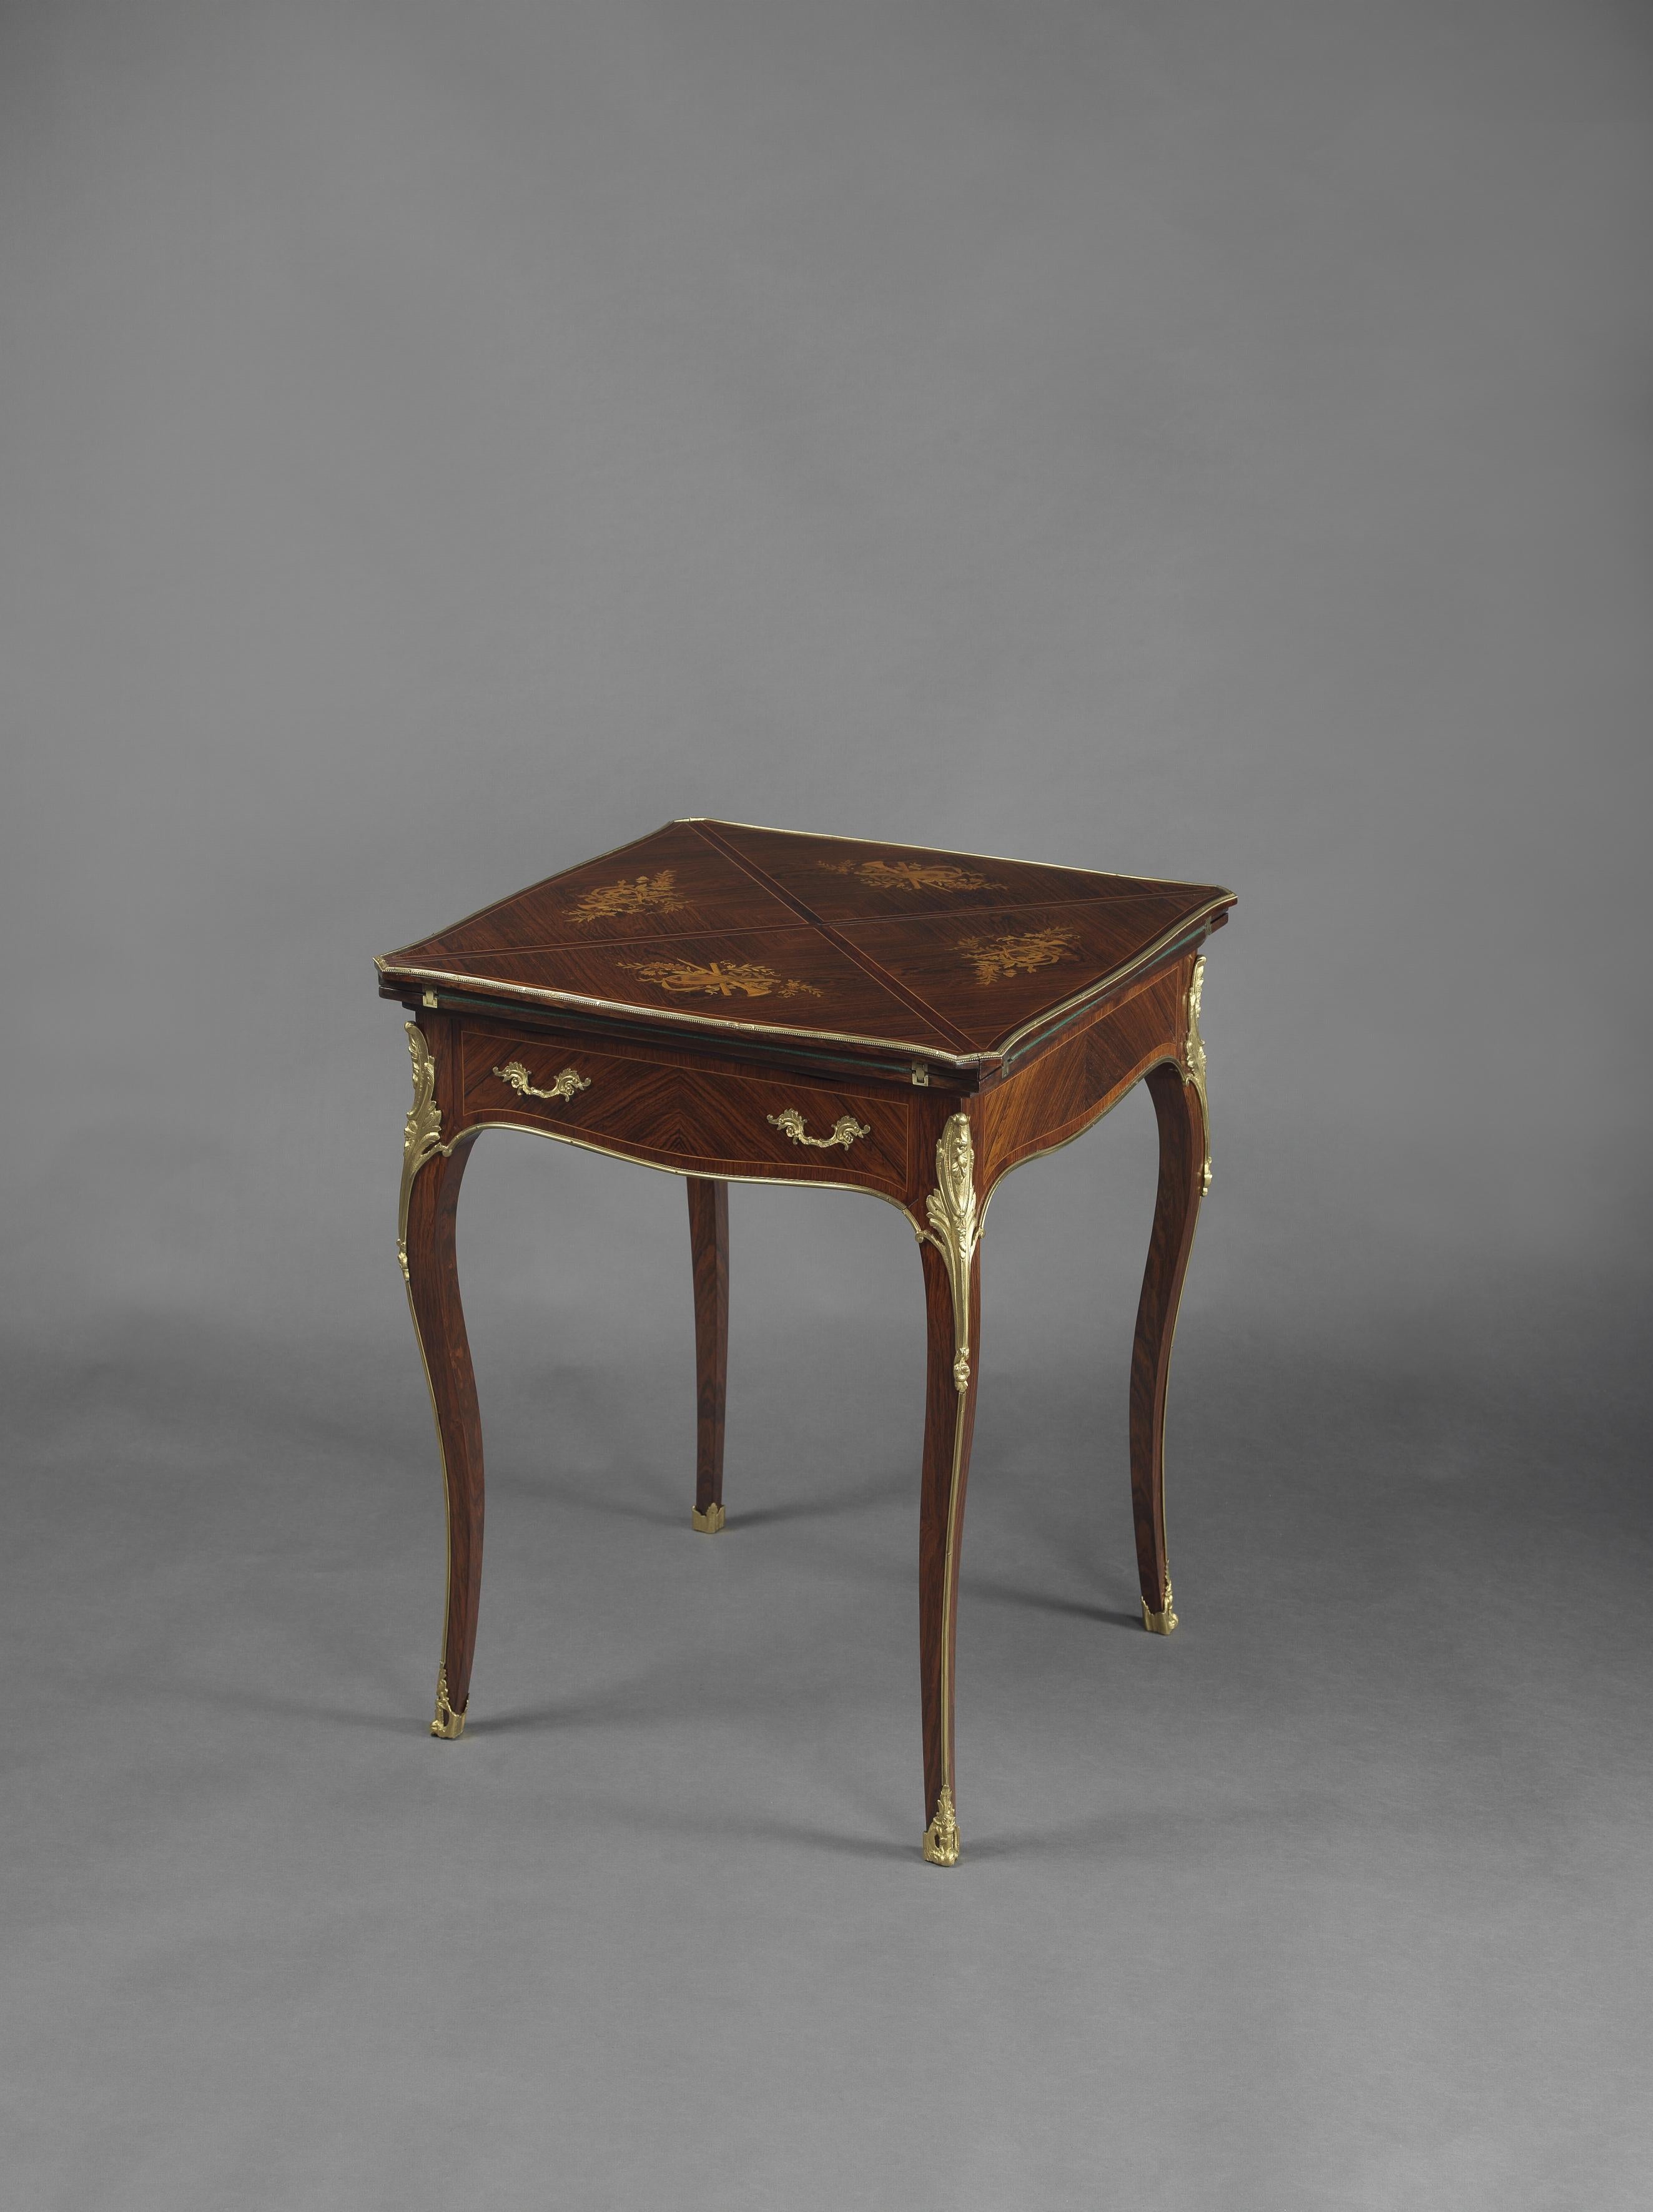 A Louis XV style gilt-bronze mounted marquetry inlaid envelope card table.

French, circa 1890. 

This fine card table has a swivel top, with four 'envelope' panels inlaid with musical trophies opening to a green baize playing surface, the